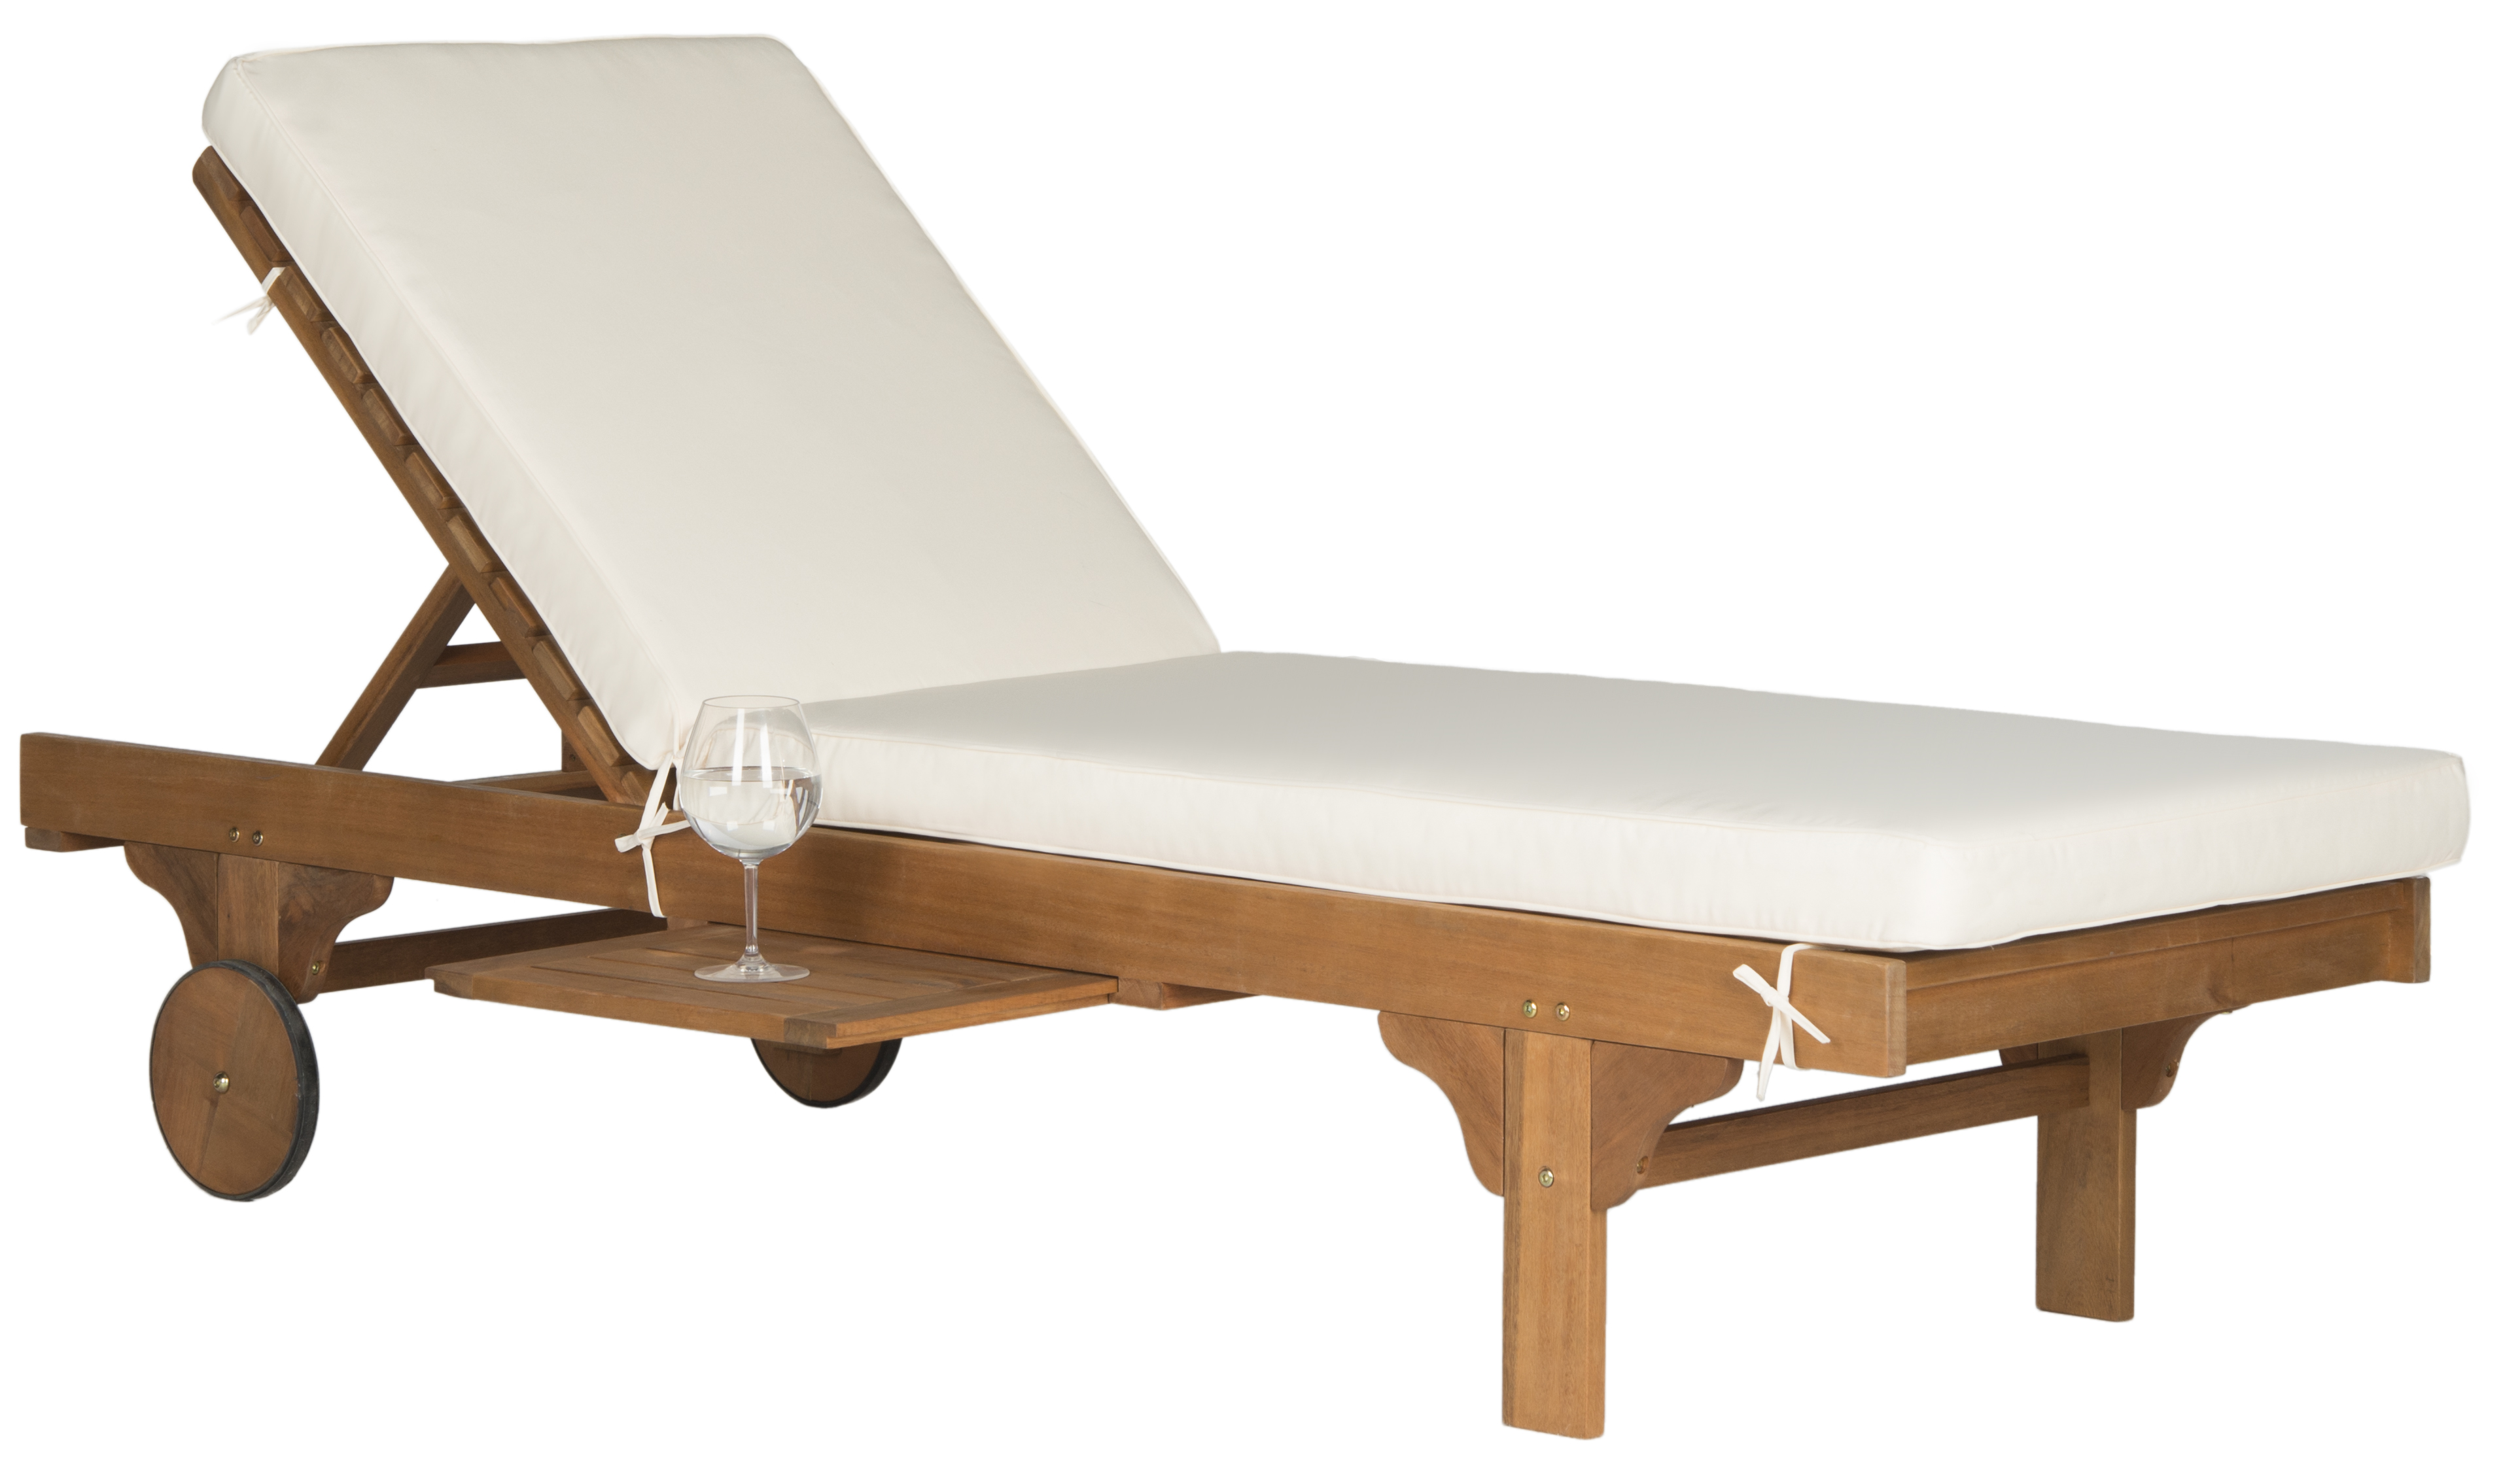 SAFAVIEH Outdoor Collection Newport Chaise Chair & Side Table Natural/Beige - image 2 of 9